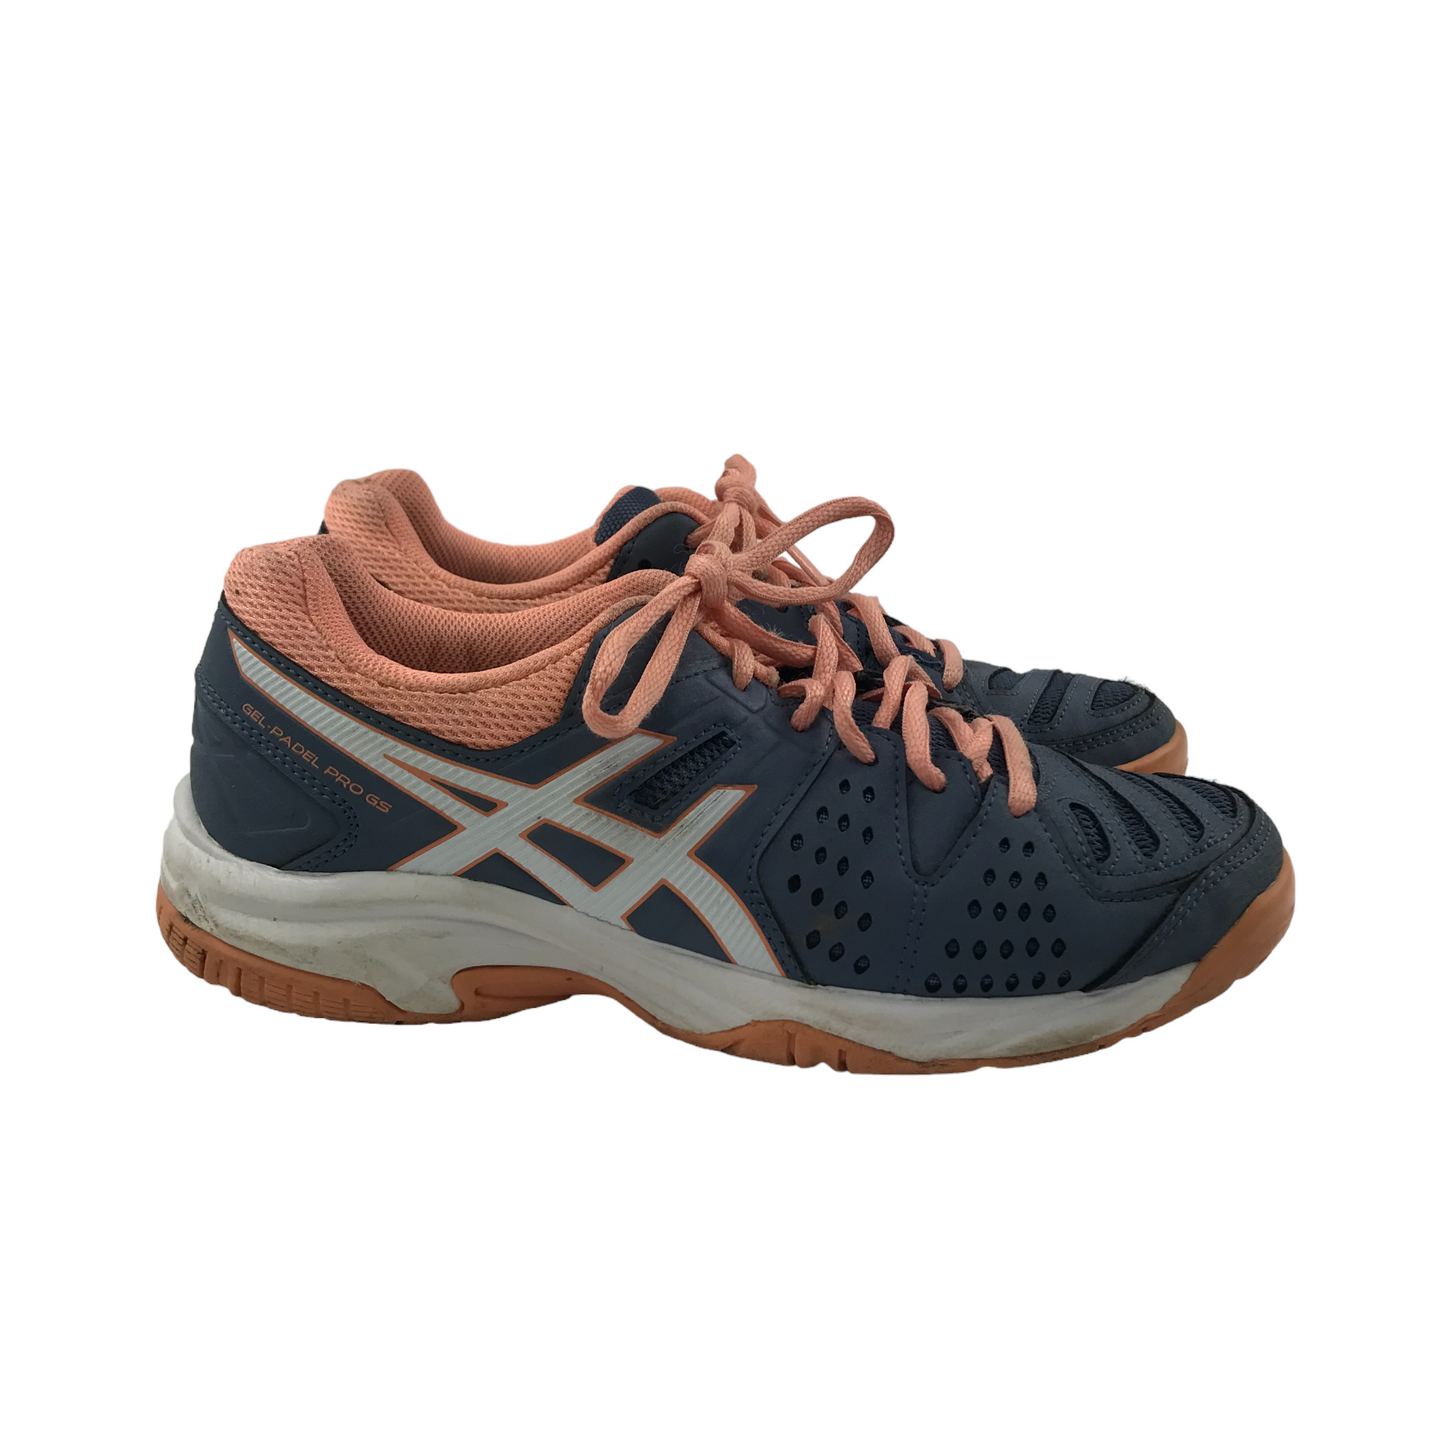 Asics Trainers Shoe Size 3 Grey and Peachy with Laces